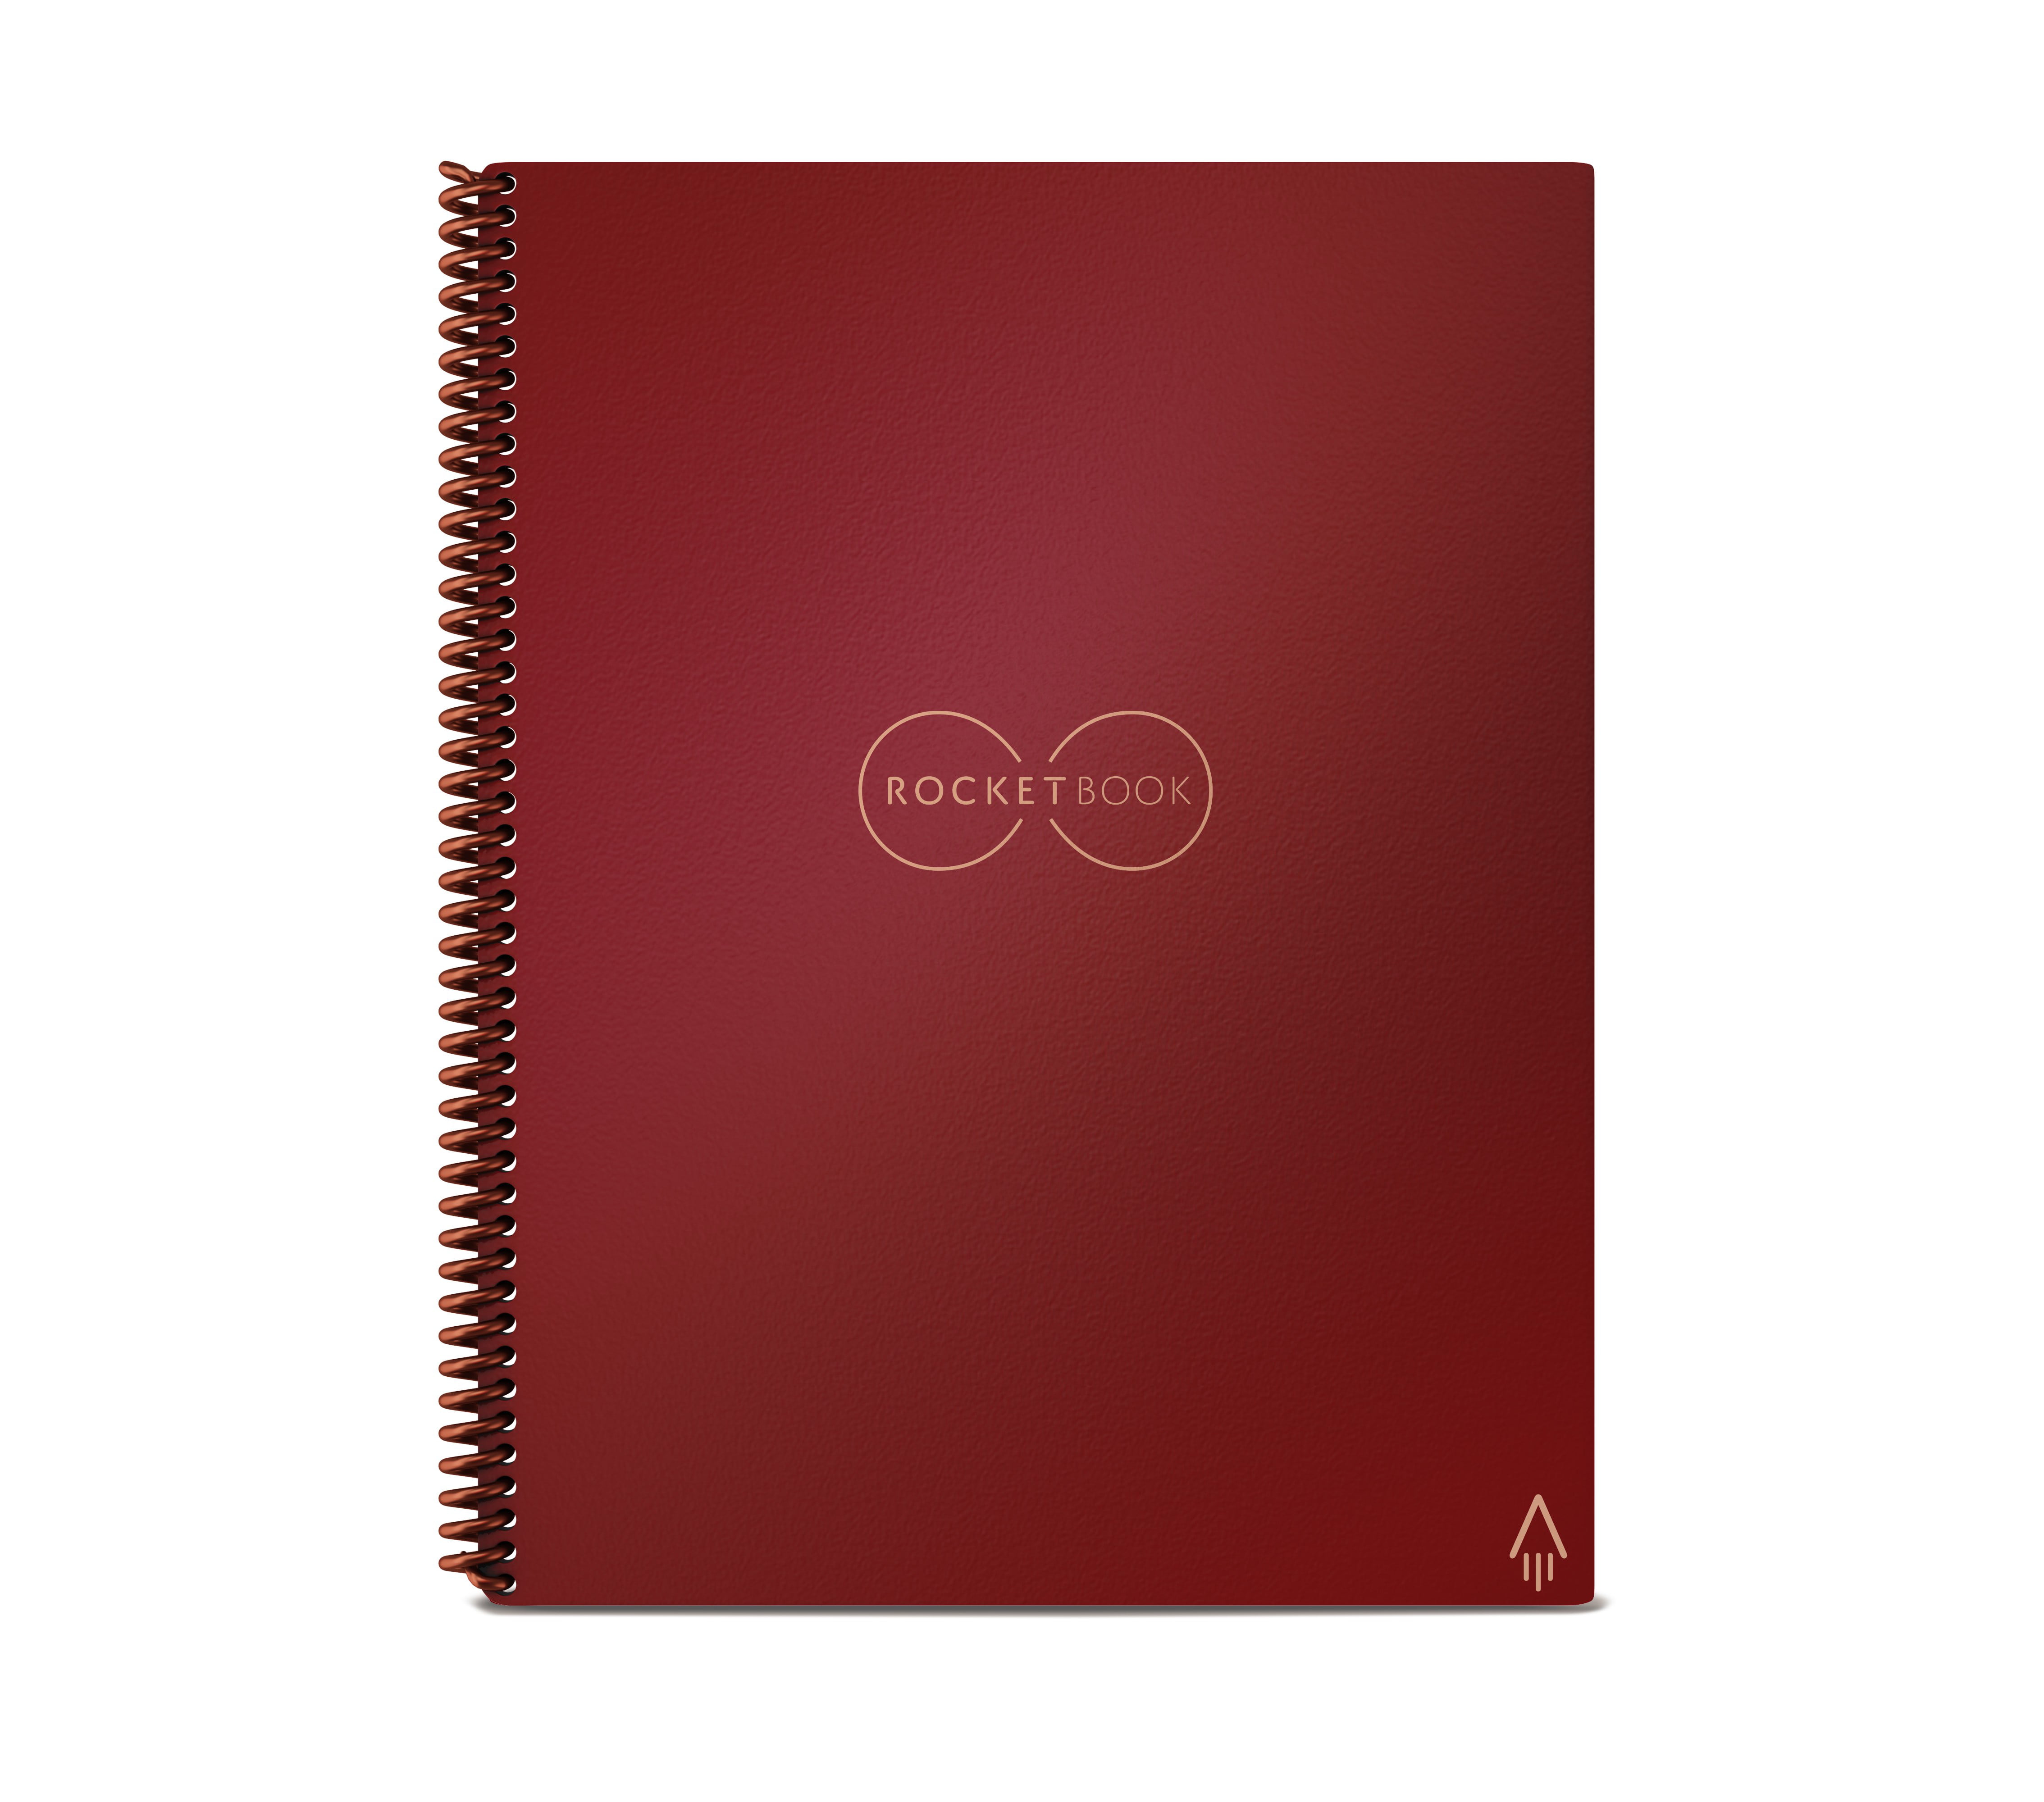 Rocketbook Everlast Smart Reusable Notebook, Dotted Rule, Atomic Red Cover,  6 x 8.8, 18 Sheets (24328144)